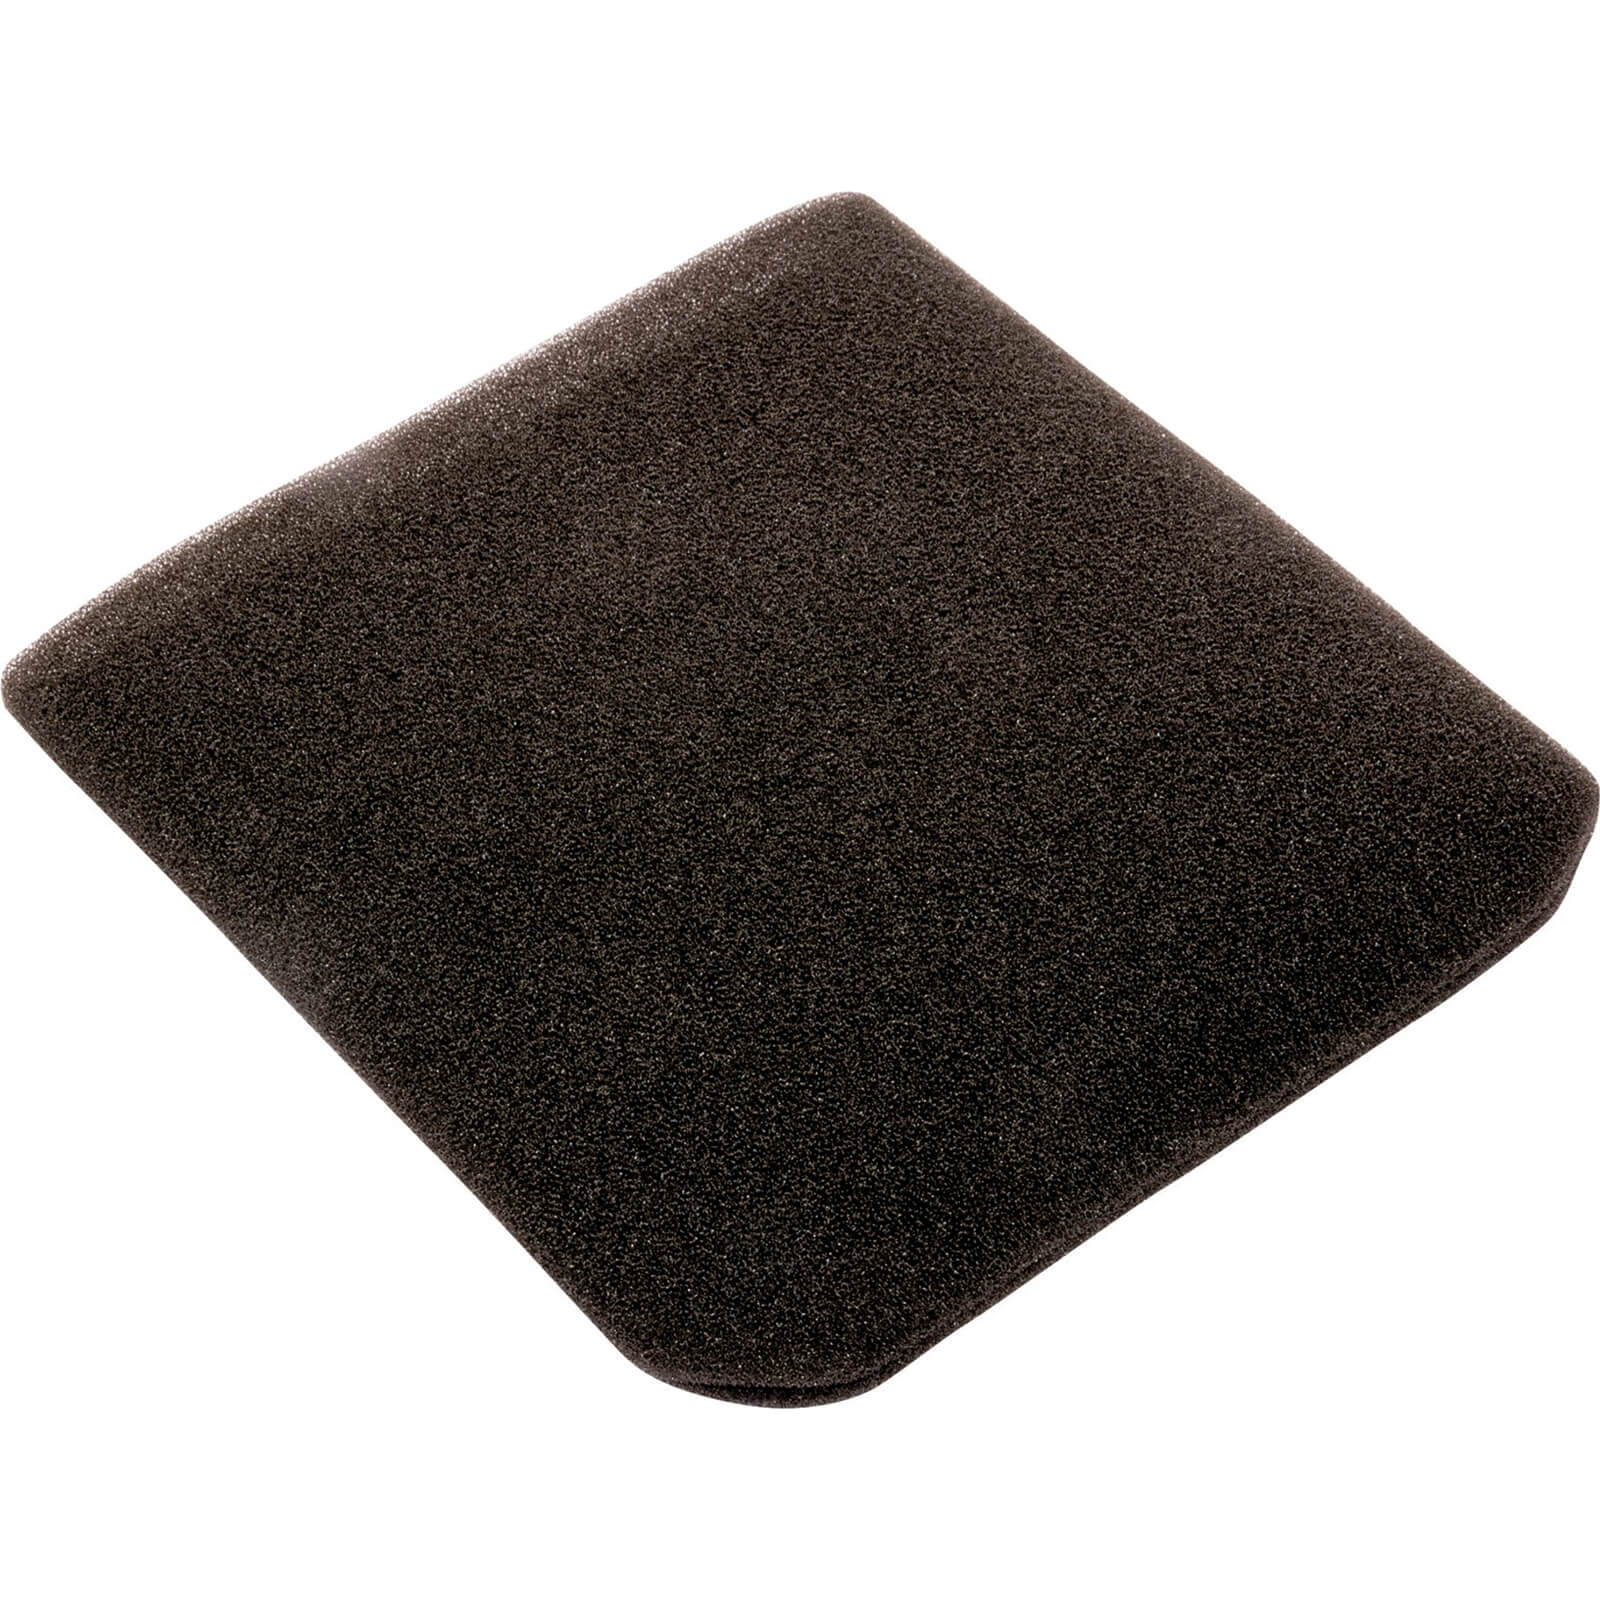 Image of Draper Anti Foam Filter for 53006 Wet and Dry Vacuum Cleaner